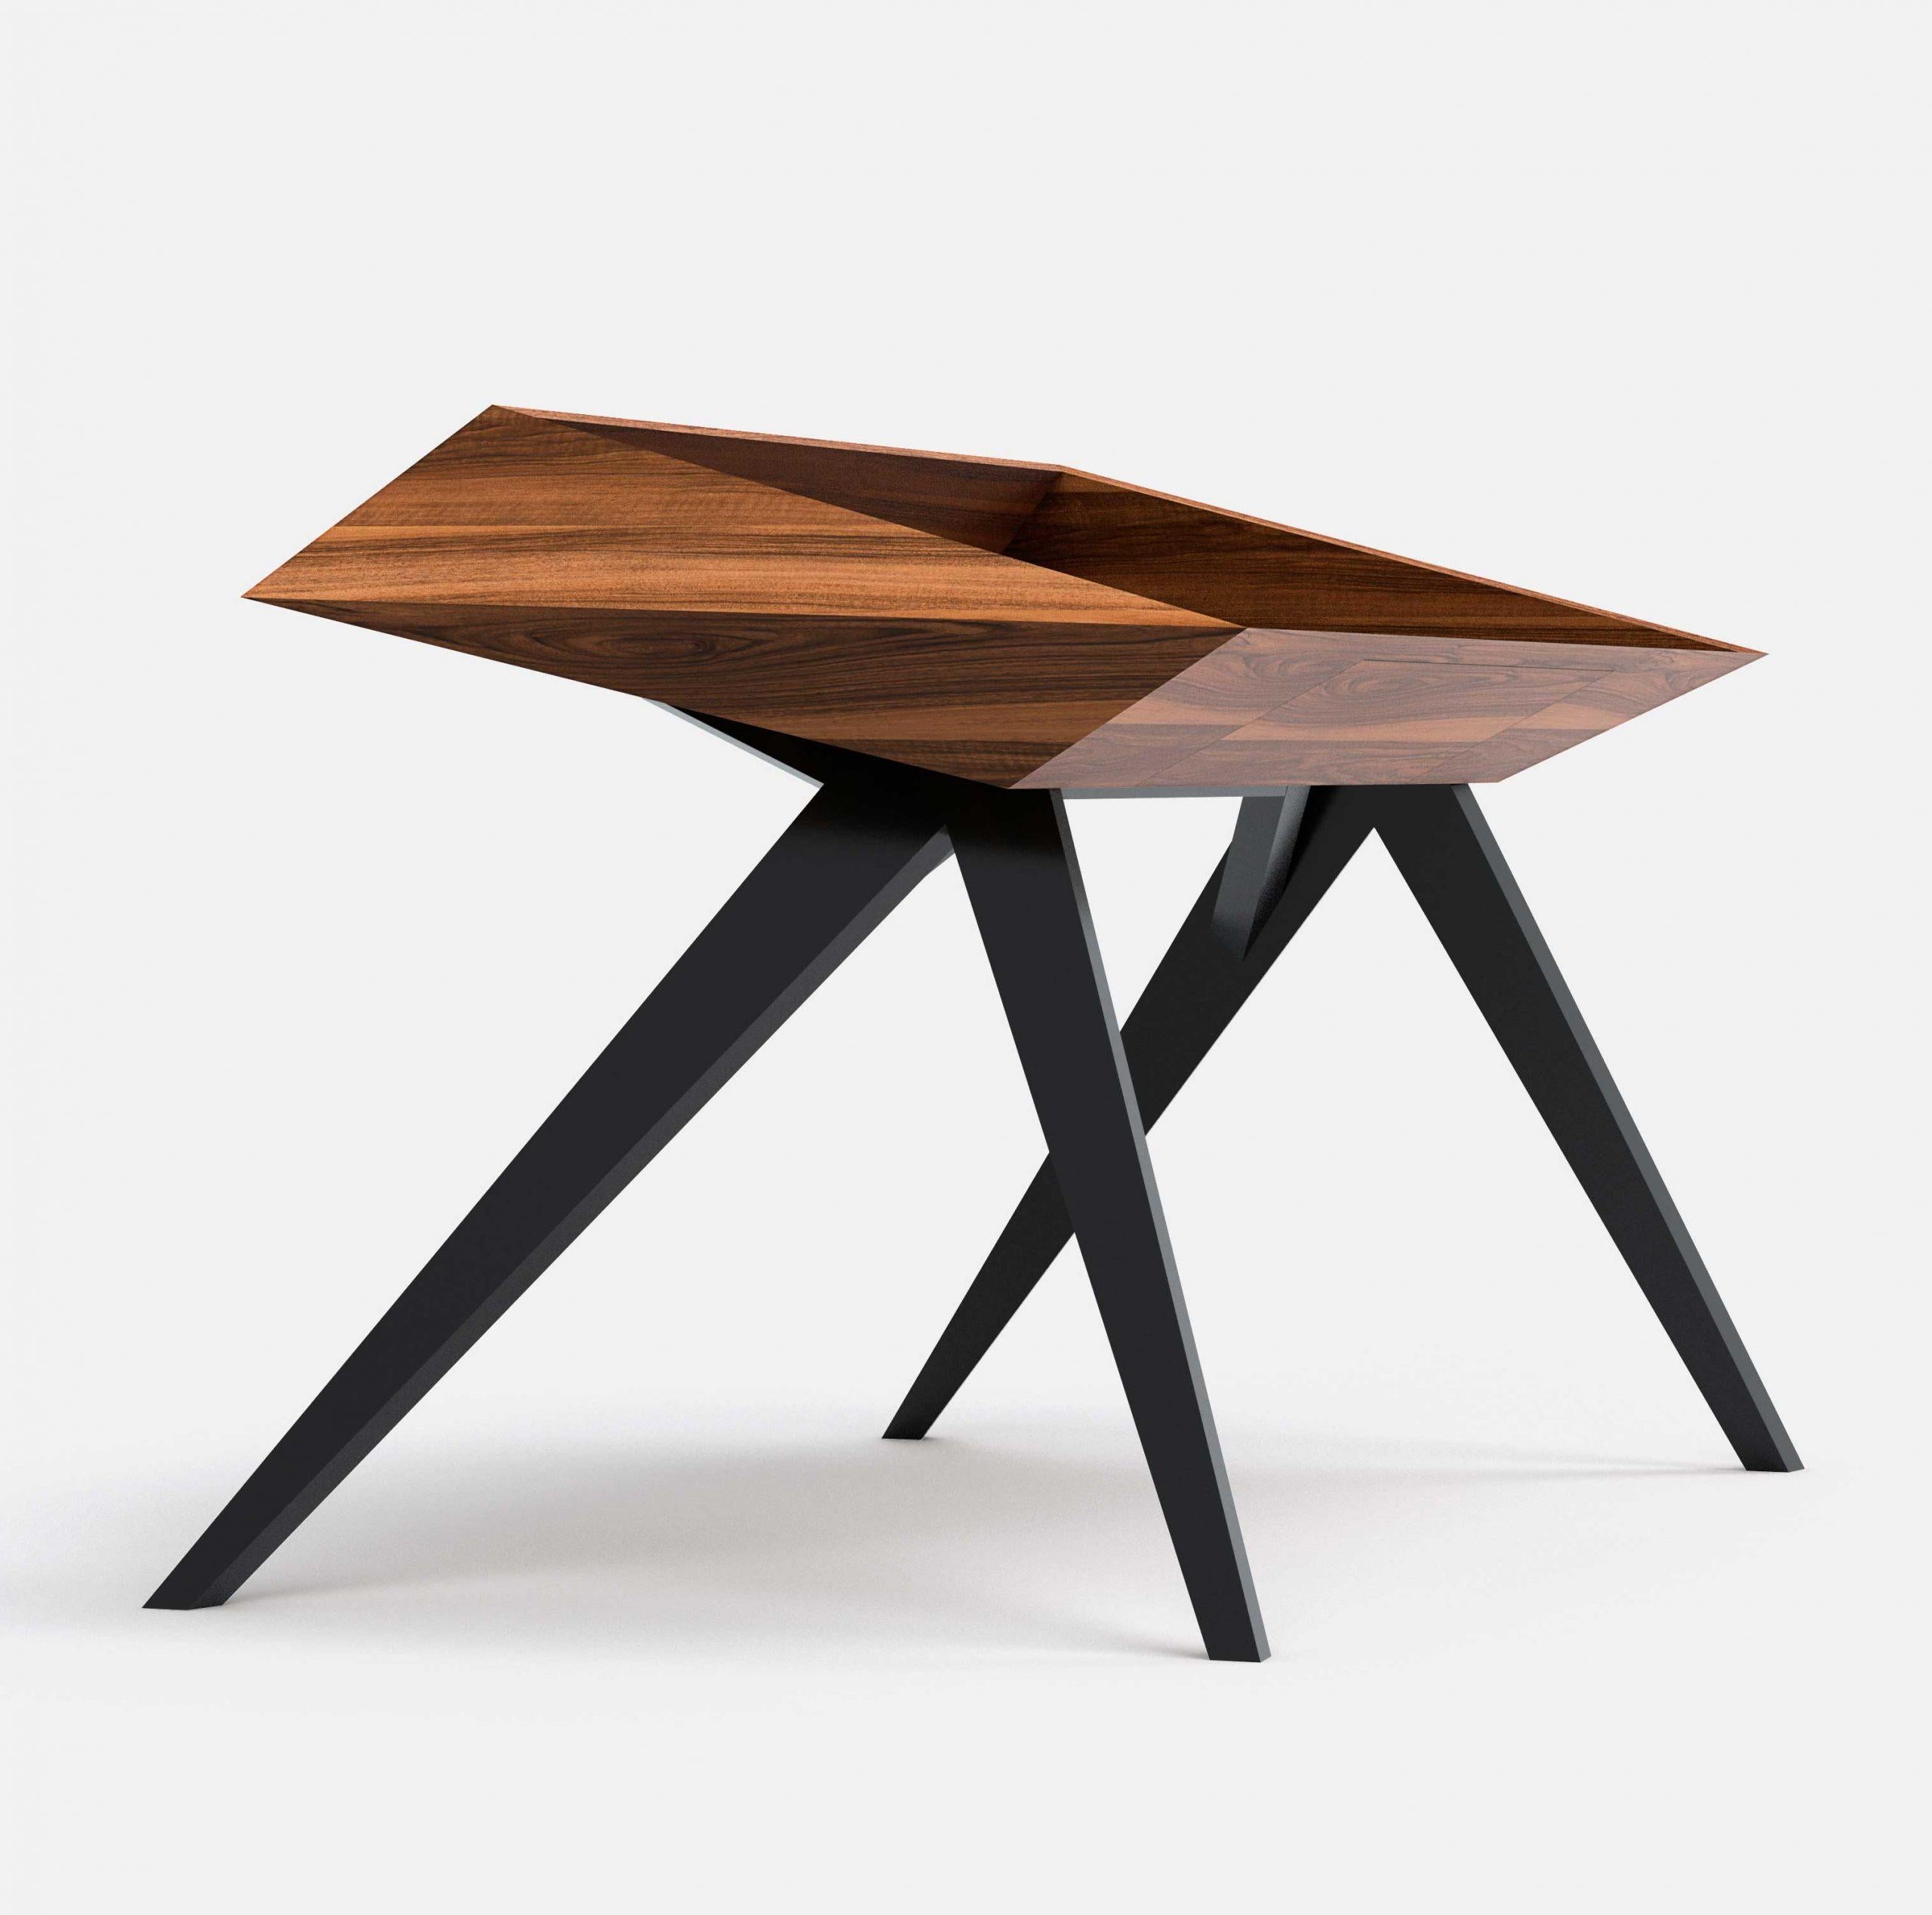 Wow desk by Alexandre Caldas
Dimensions: W 170 x D 80 x H 76 cm
Materials: Solid walnut wood, painted ash

Materials available in ash, beech, walnut
Dimensions available: W 100, W 120, W 150, W 170




Our values lie in the respect,